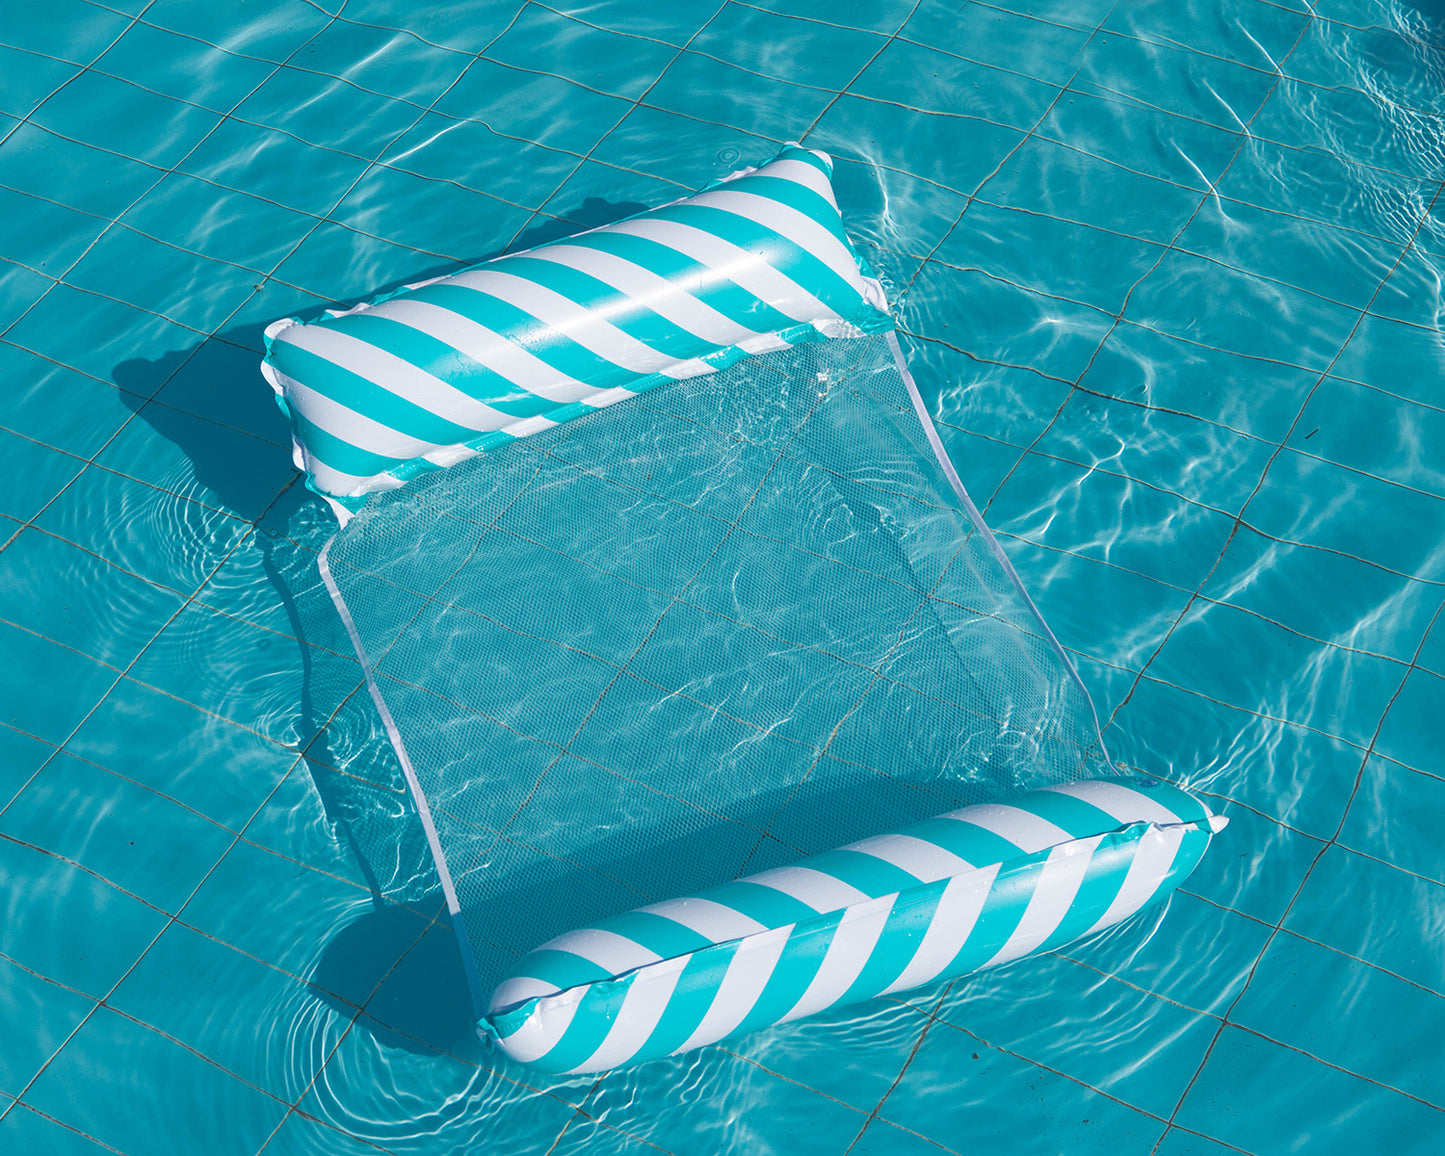 Candy Striped Hammock - Inflatable | Inflatables | PARADIS SVP